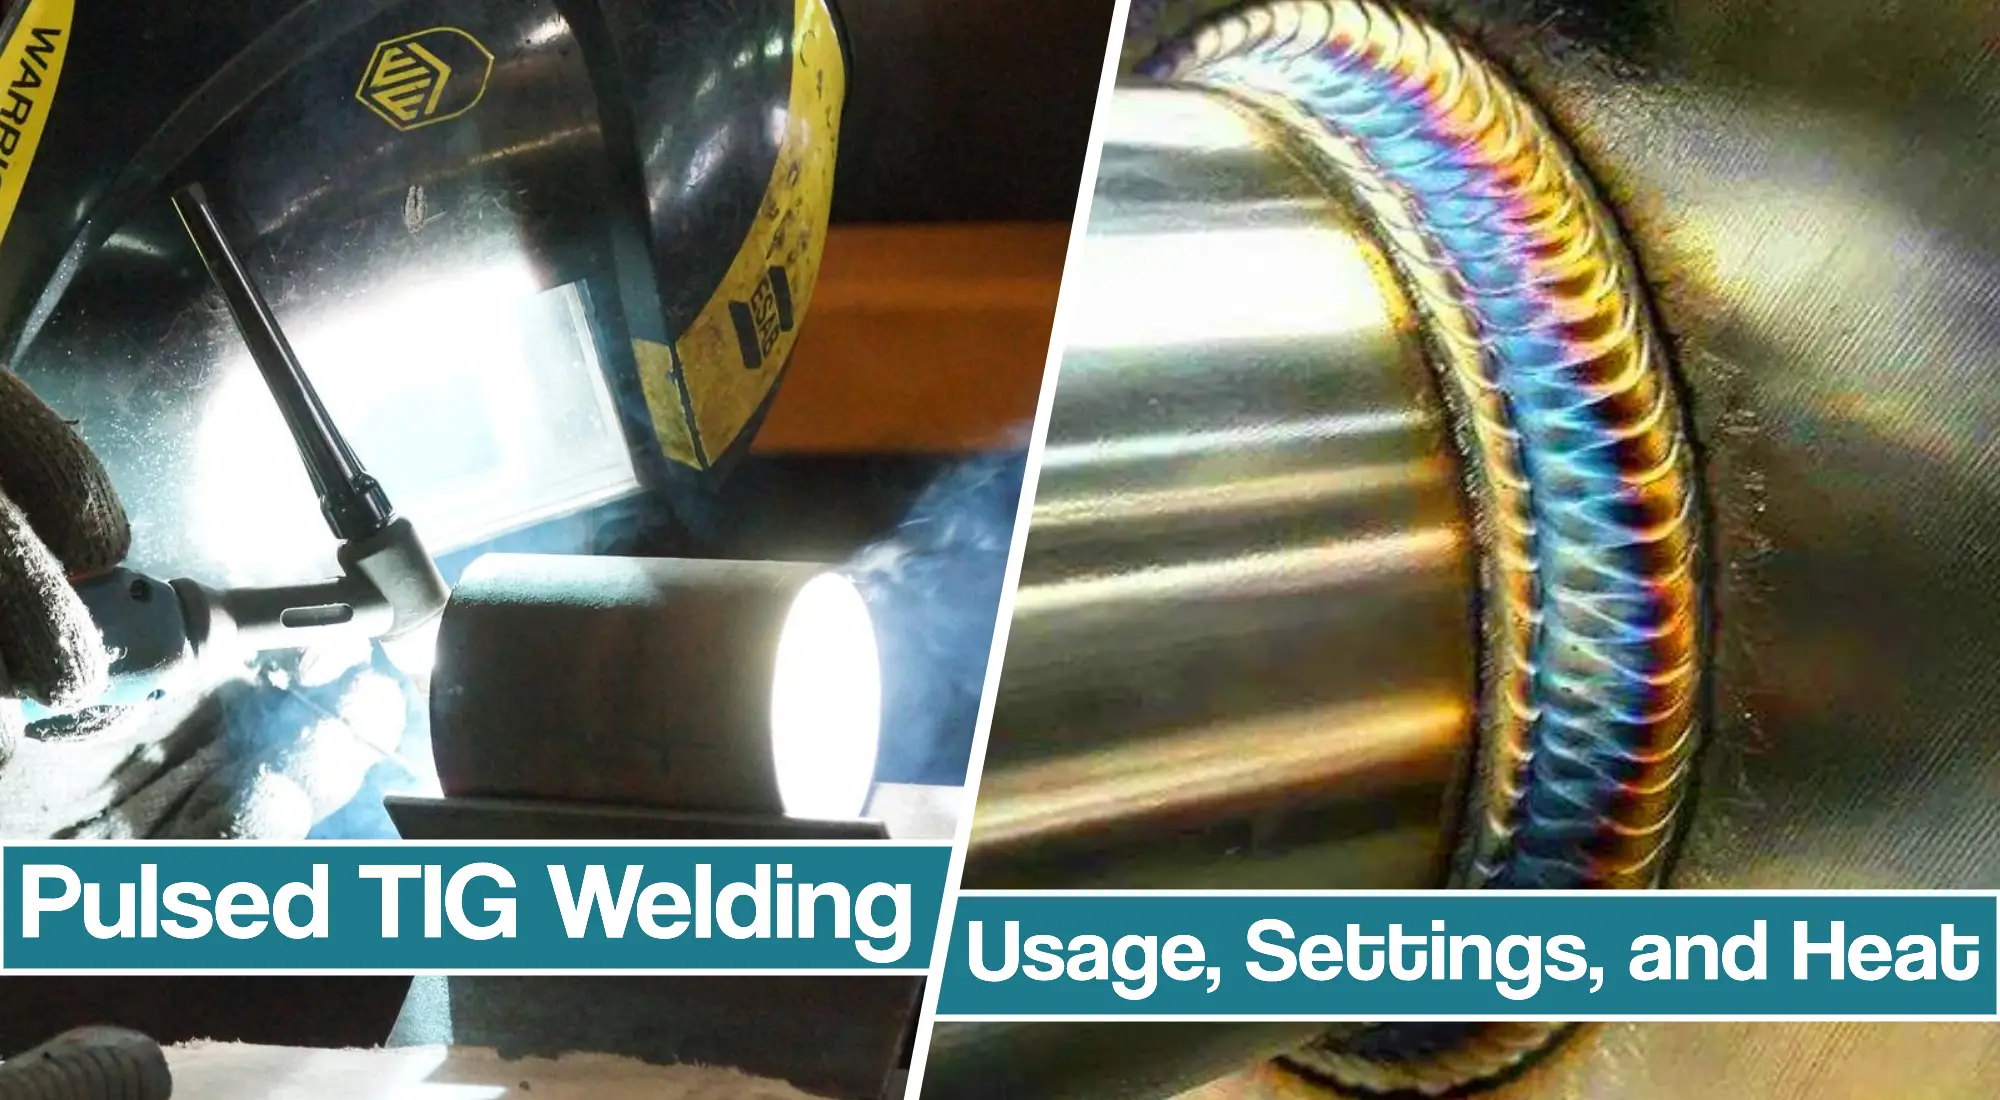 Featured image for the Pulsed TIG Welding article